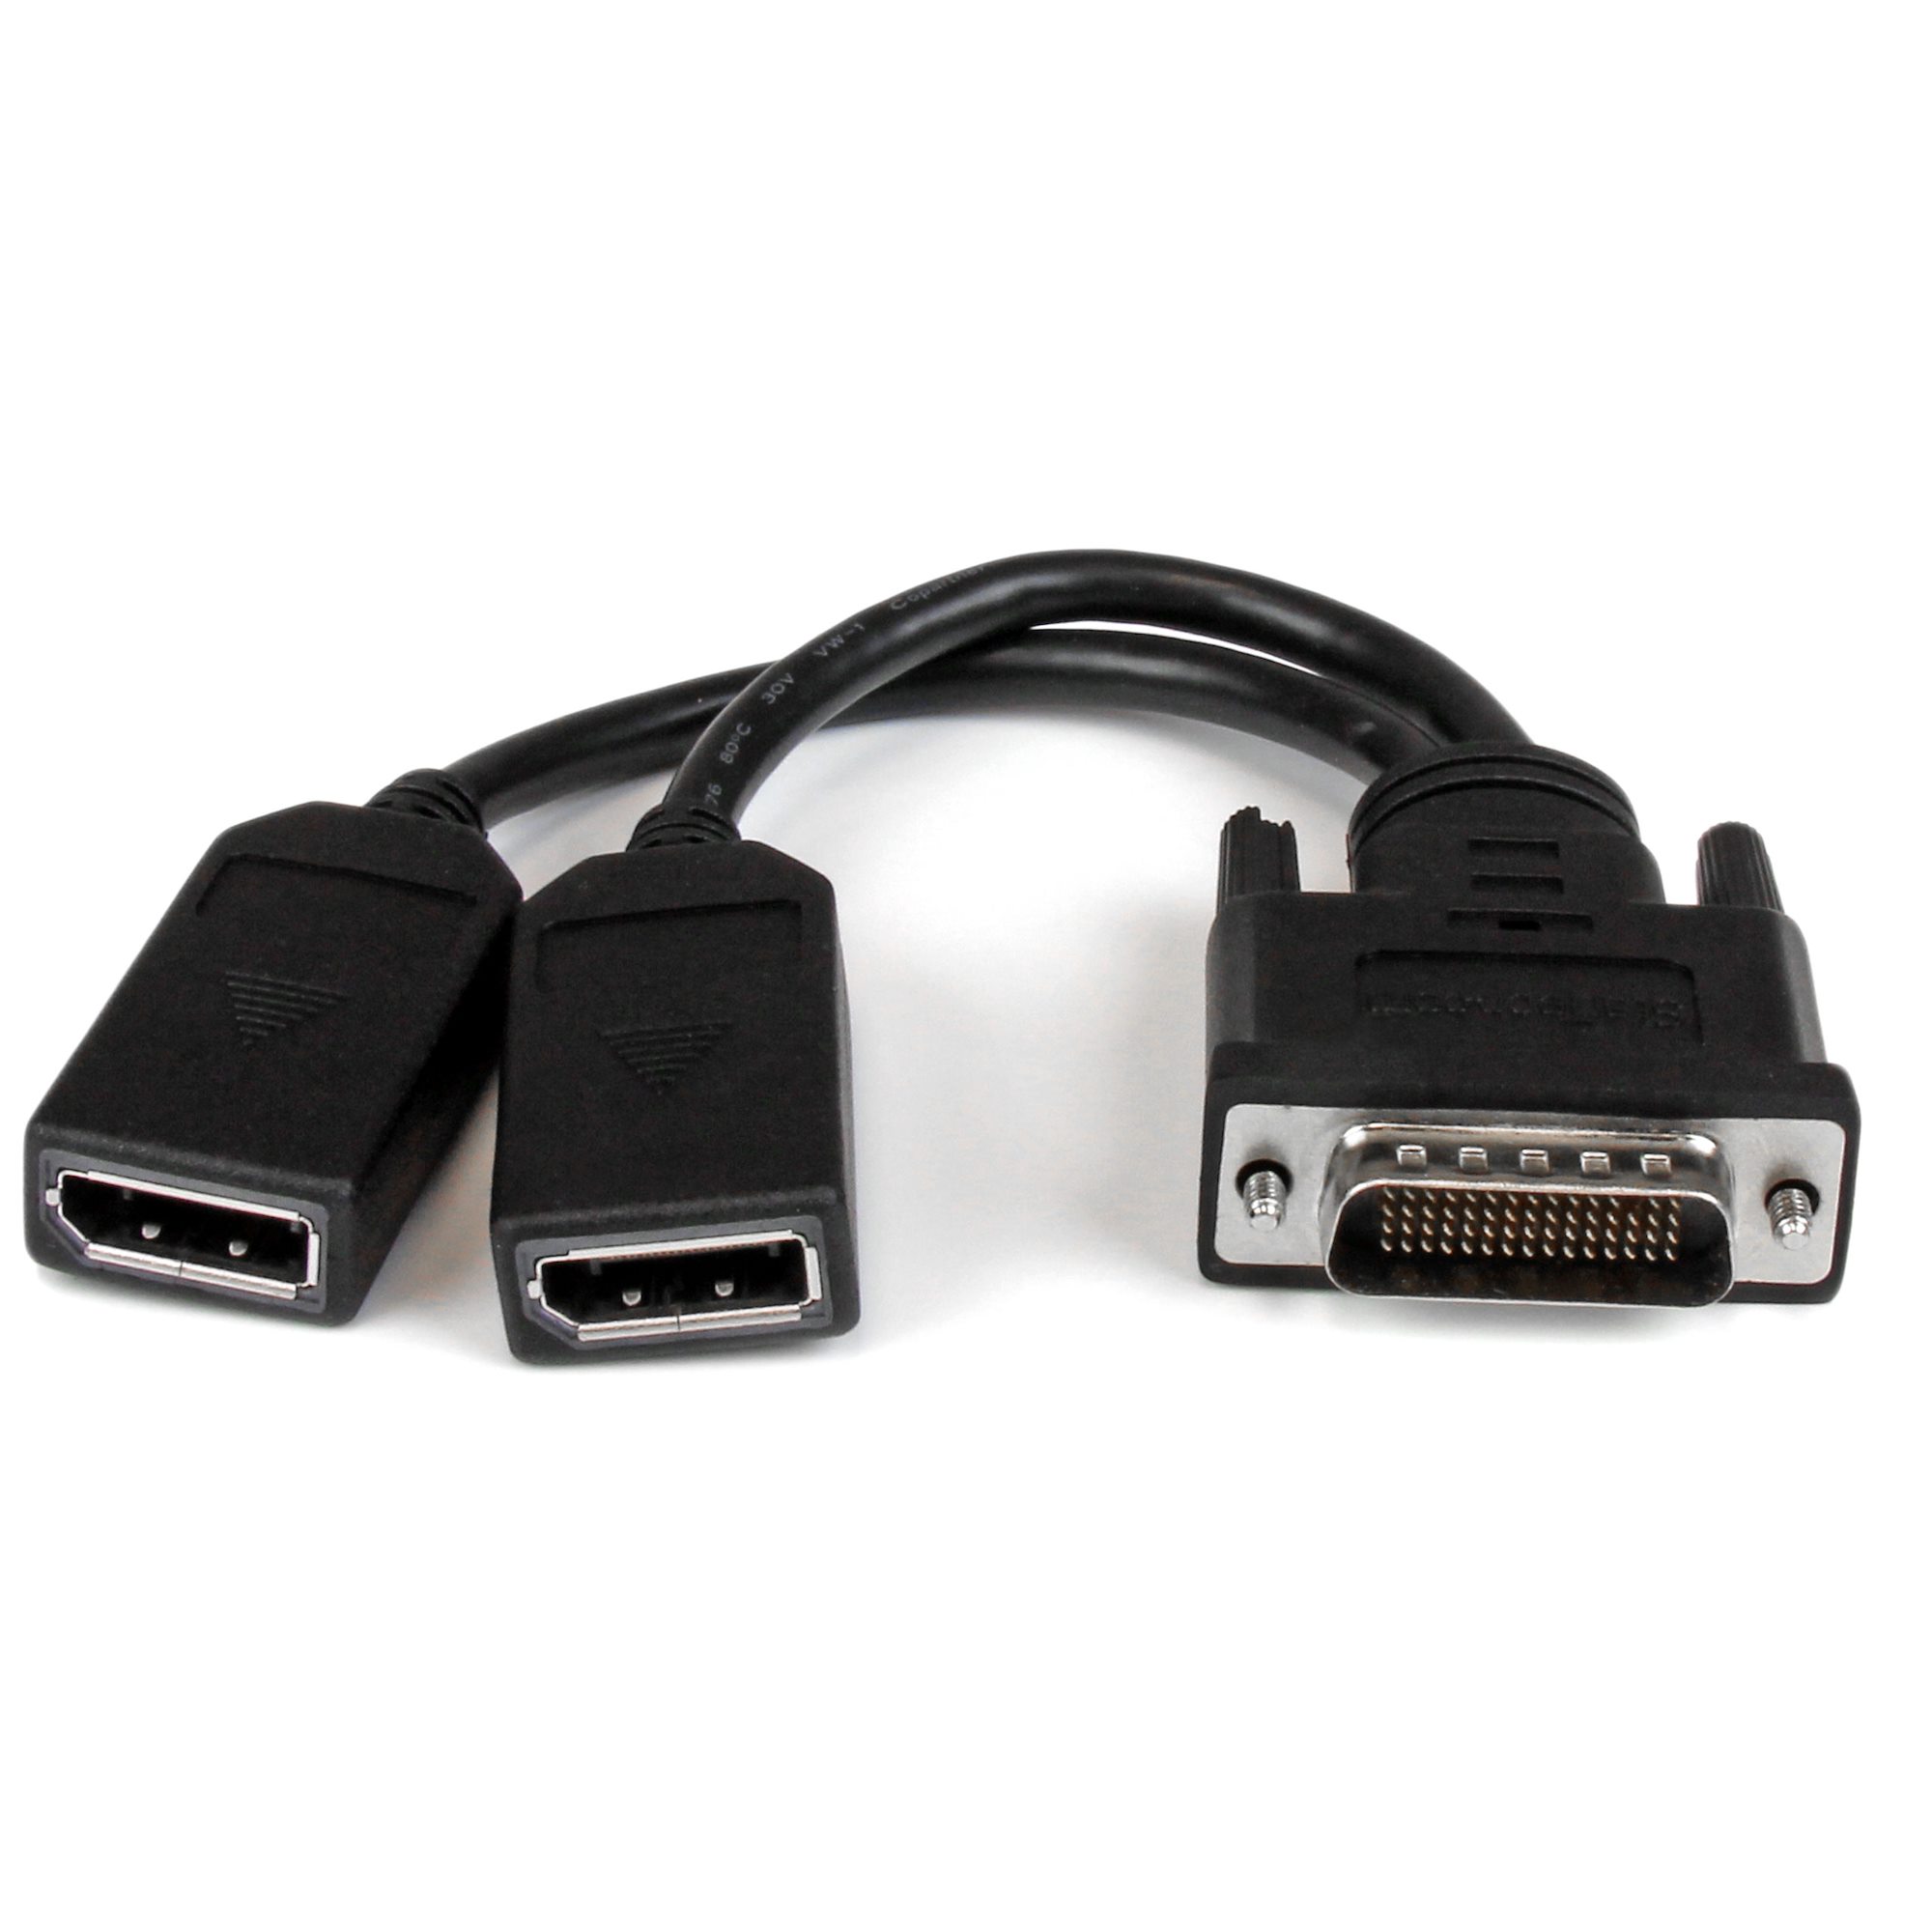 DMS 59 pin Dual displayport DMS 59 Pin to 2 DisplayPort Cable CABLEDECONN DMS 59 Pin Male to DisplayPort Female Dual Monitor Extension Cable Adapter for Lhf Graphics Card 